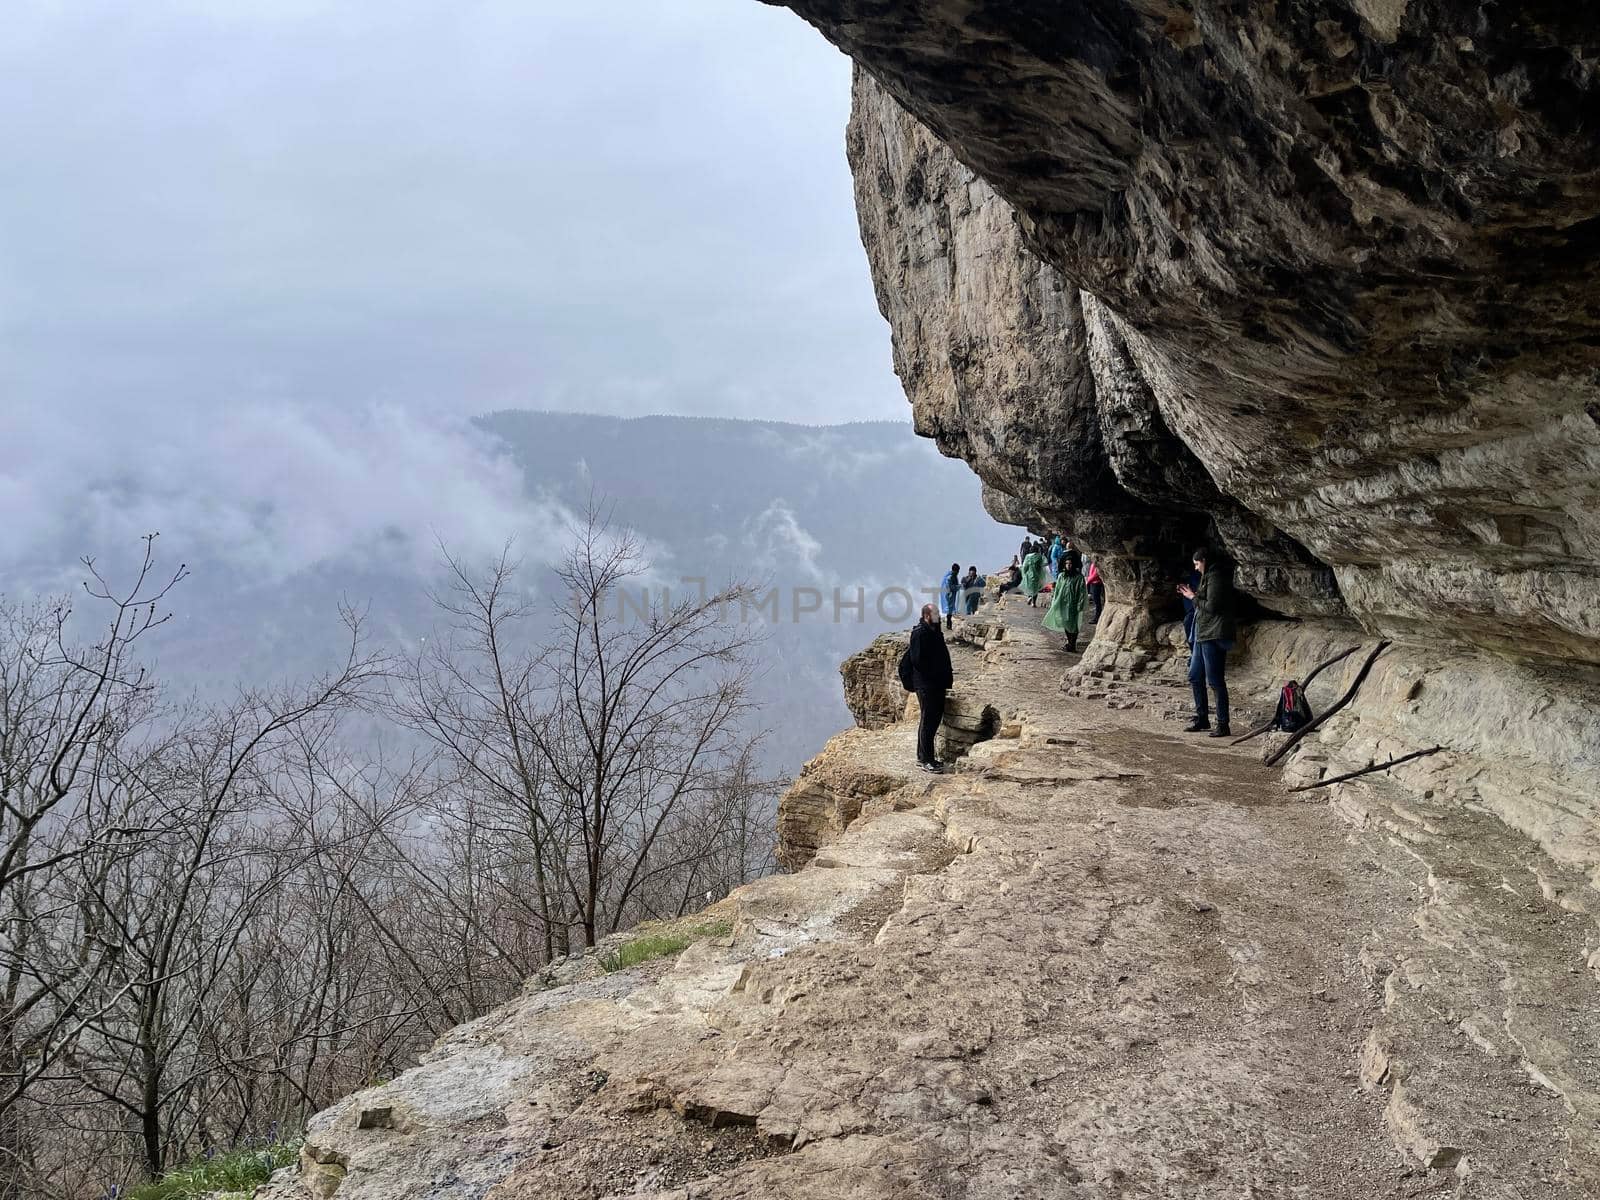 Tourists on huge cliff with spectacular view of nature. Group of people on high rock in foggy and cloudy weather.